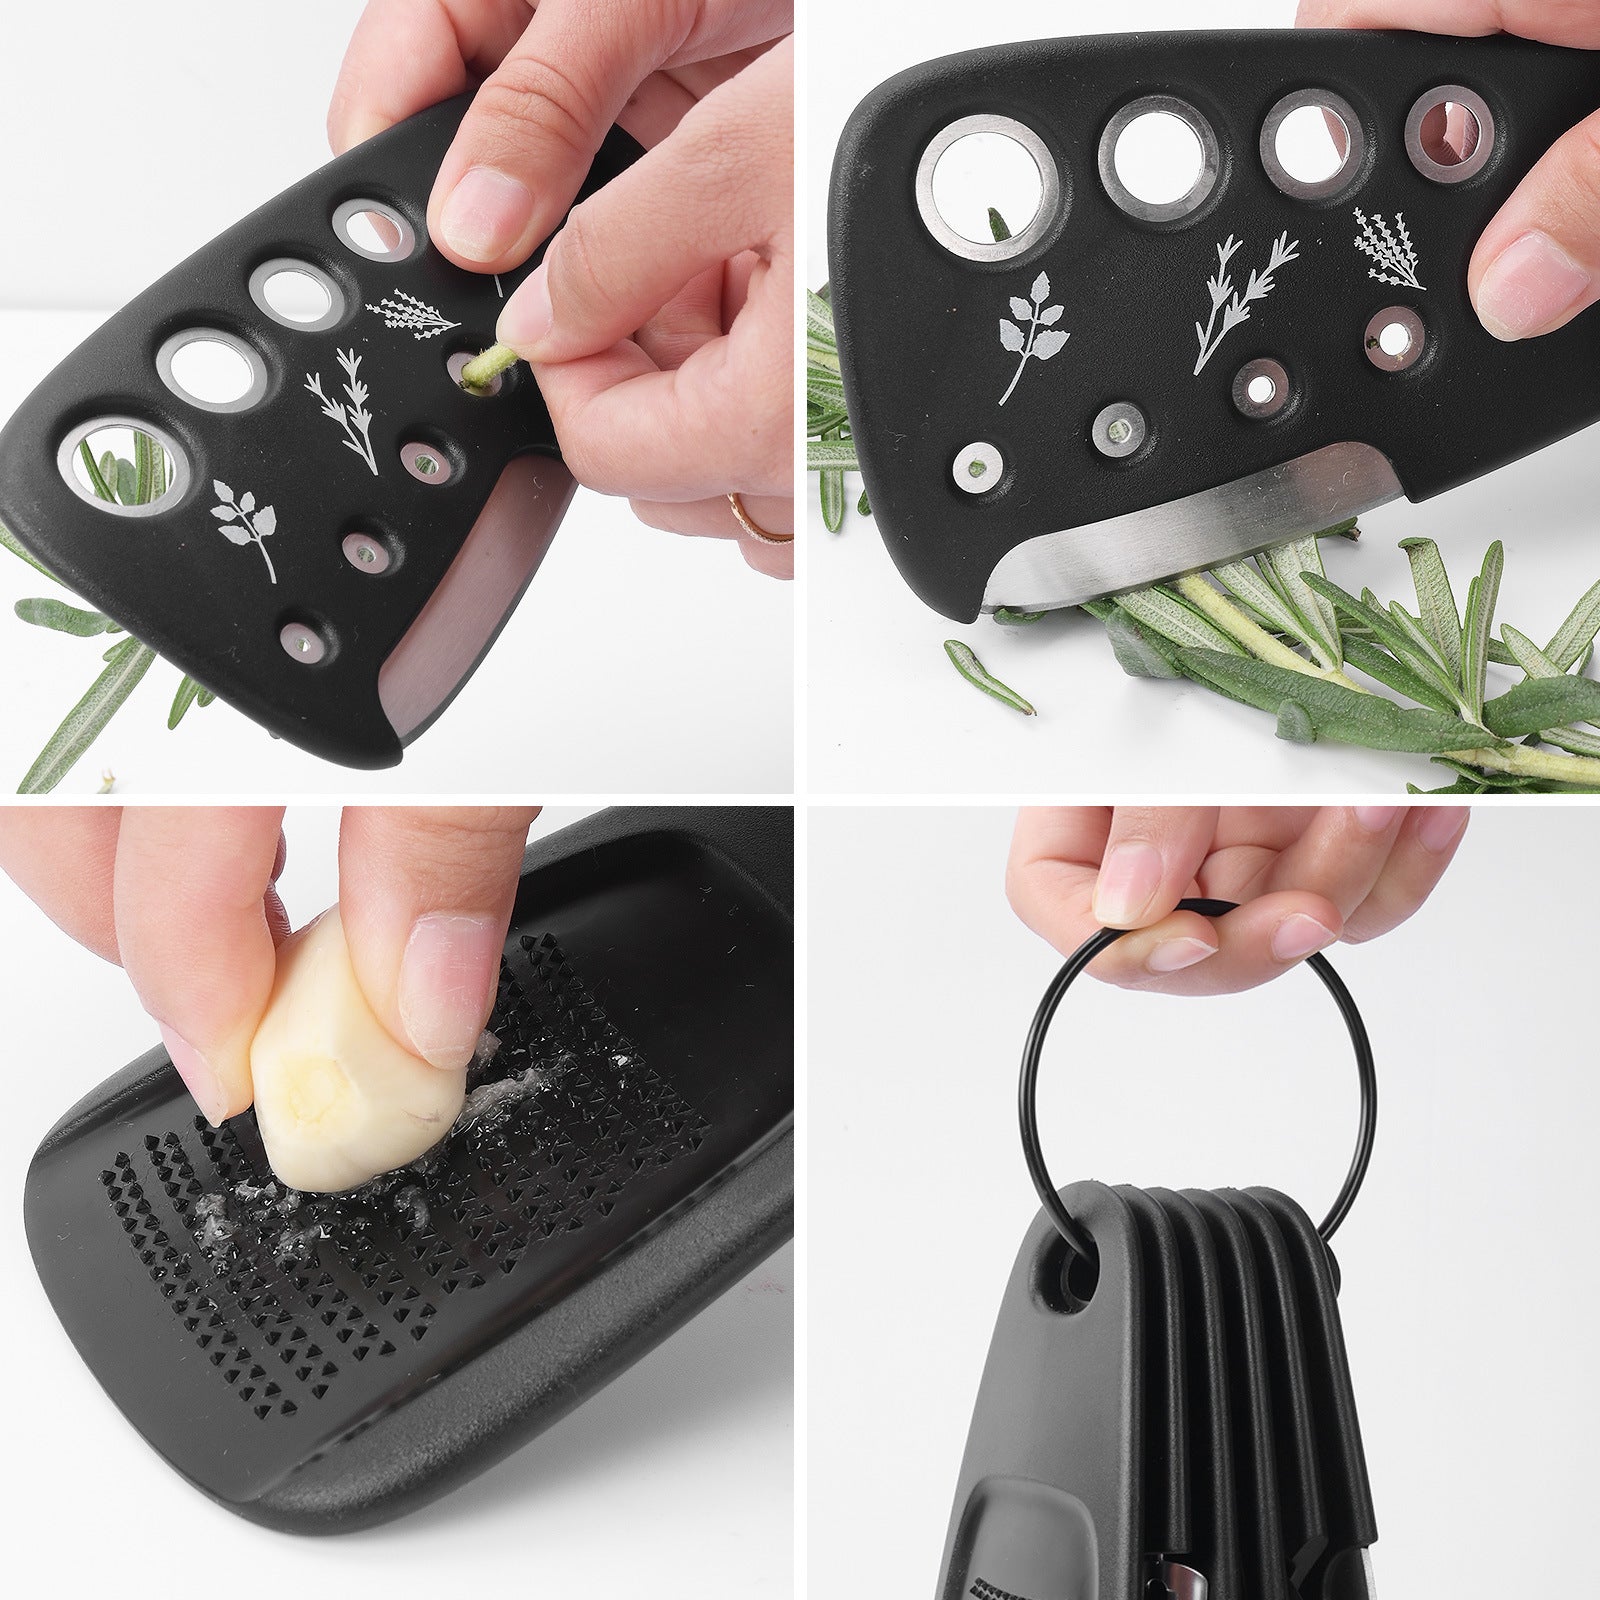 The different widgets each has its function making this a super versatile kitchen tool set to bring with you camping or traveling